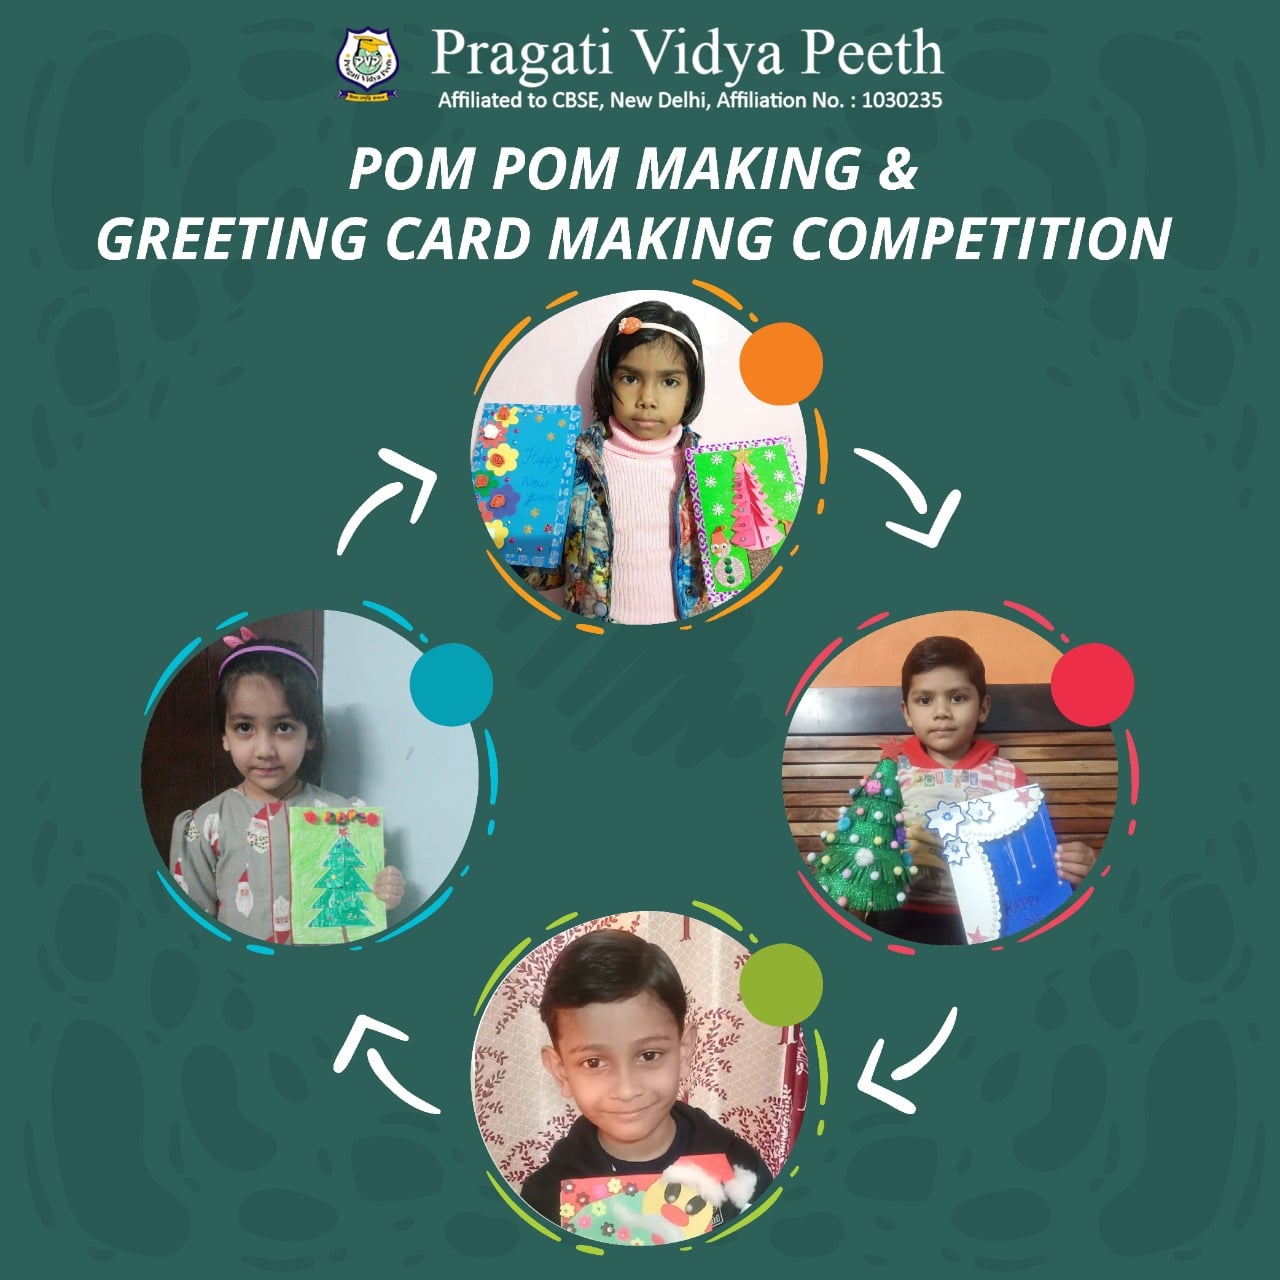 Pom Pom Making & Greeting Card Making Competition